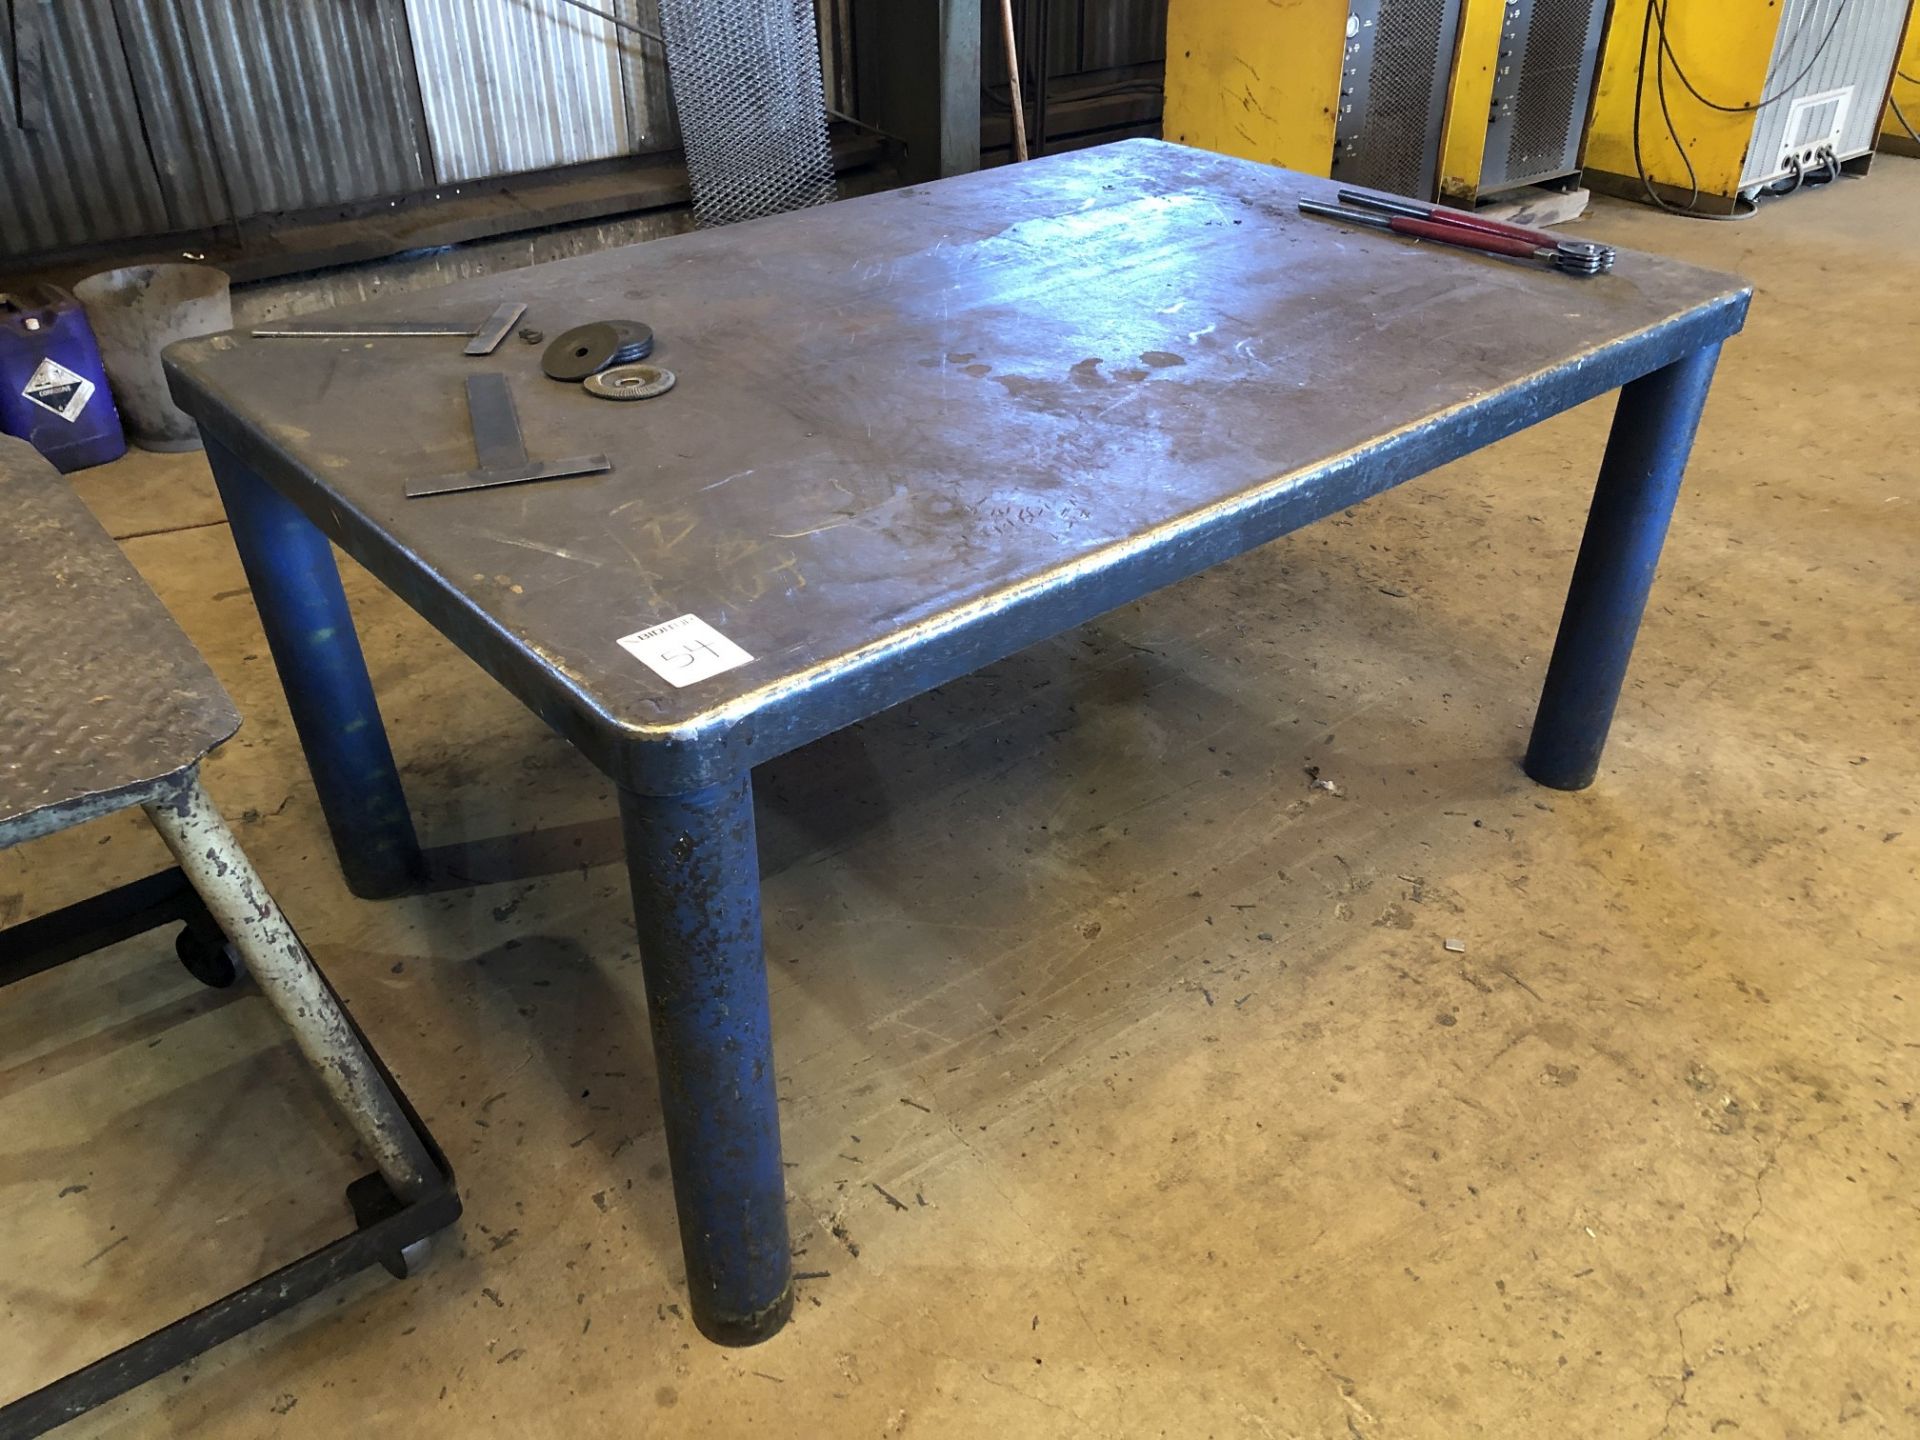 4' x 6' Metal Table [Located at 8830 Vineyard Avenue, Rancho Cucamonga, CA 91730] - Image 2 of 2